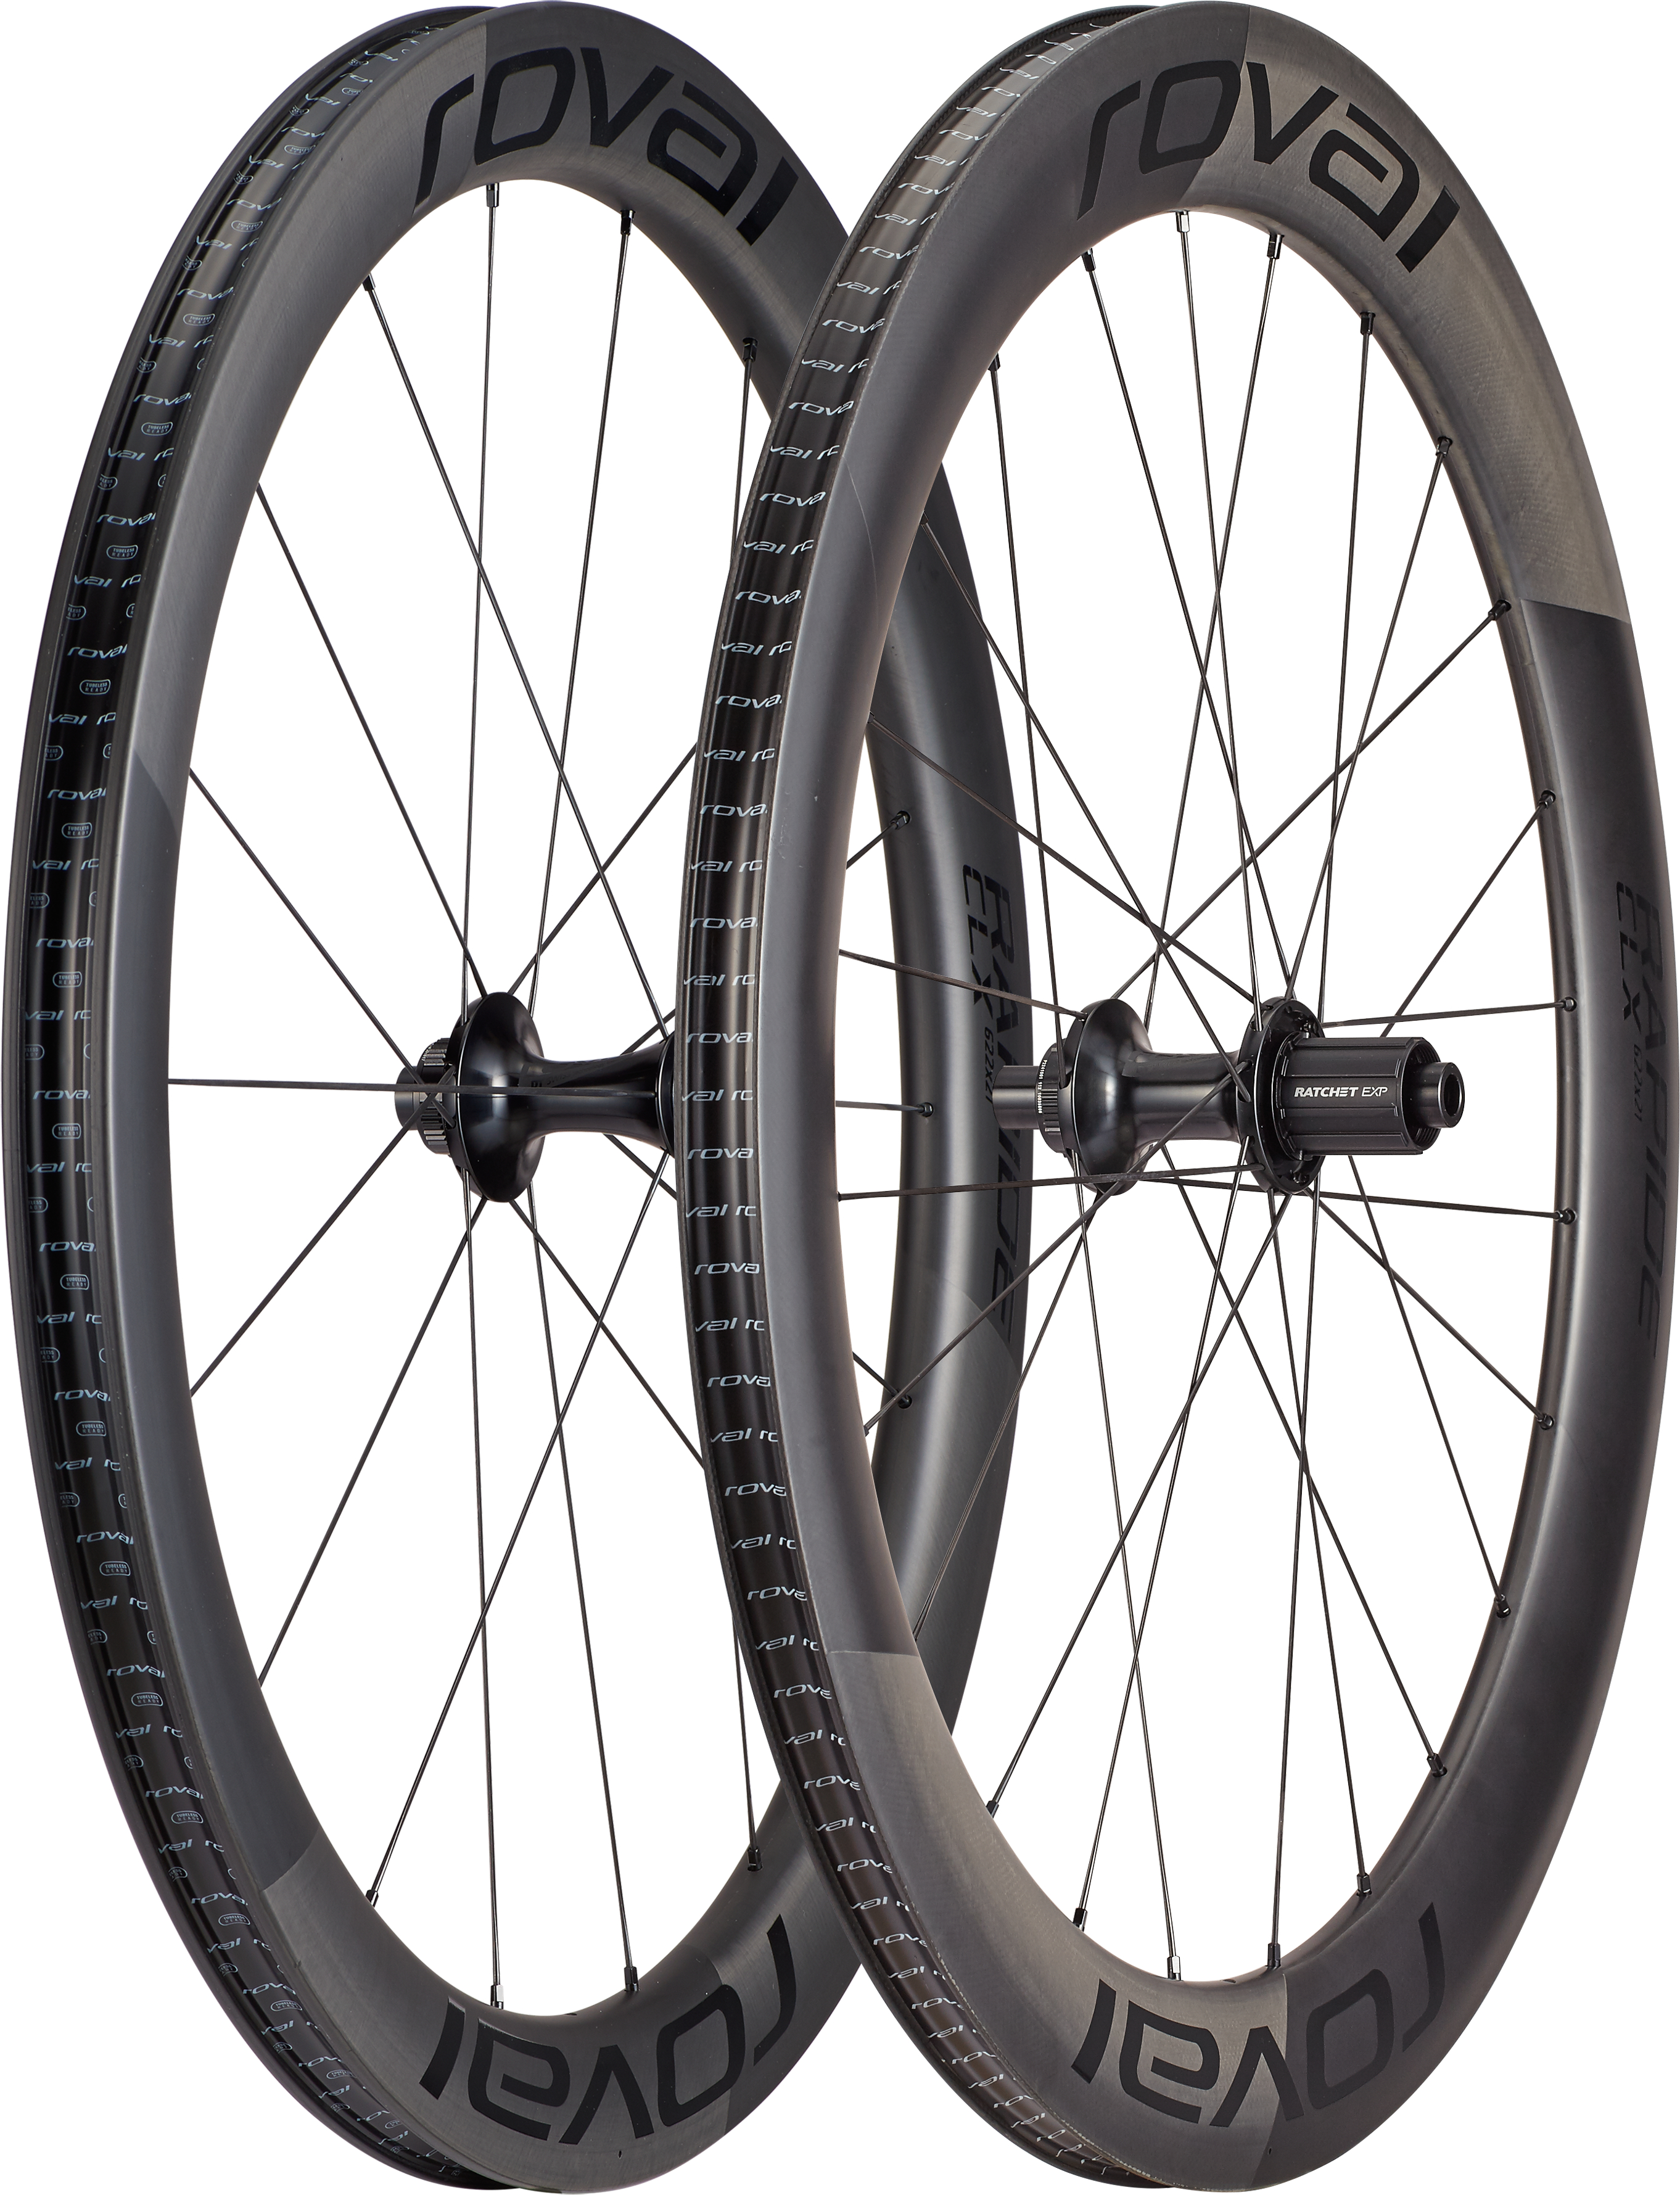 Cycles UK Specialized  Roval Rapide CLX II Wheelset 700C Rear Satin Carbon/Gloss Black